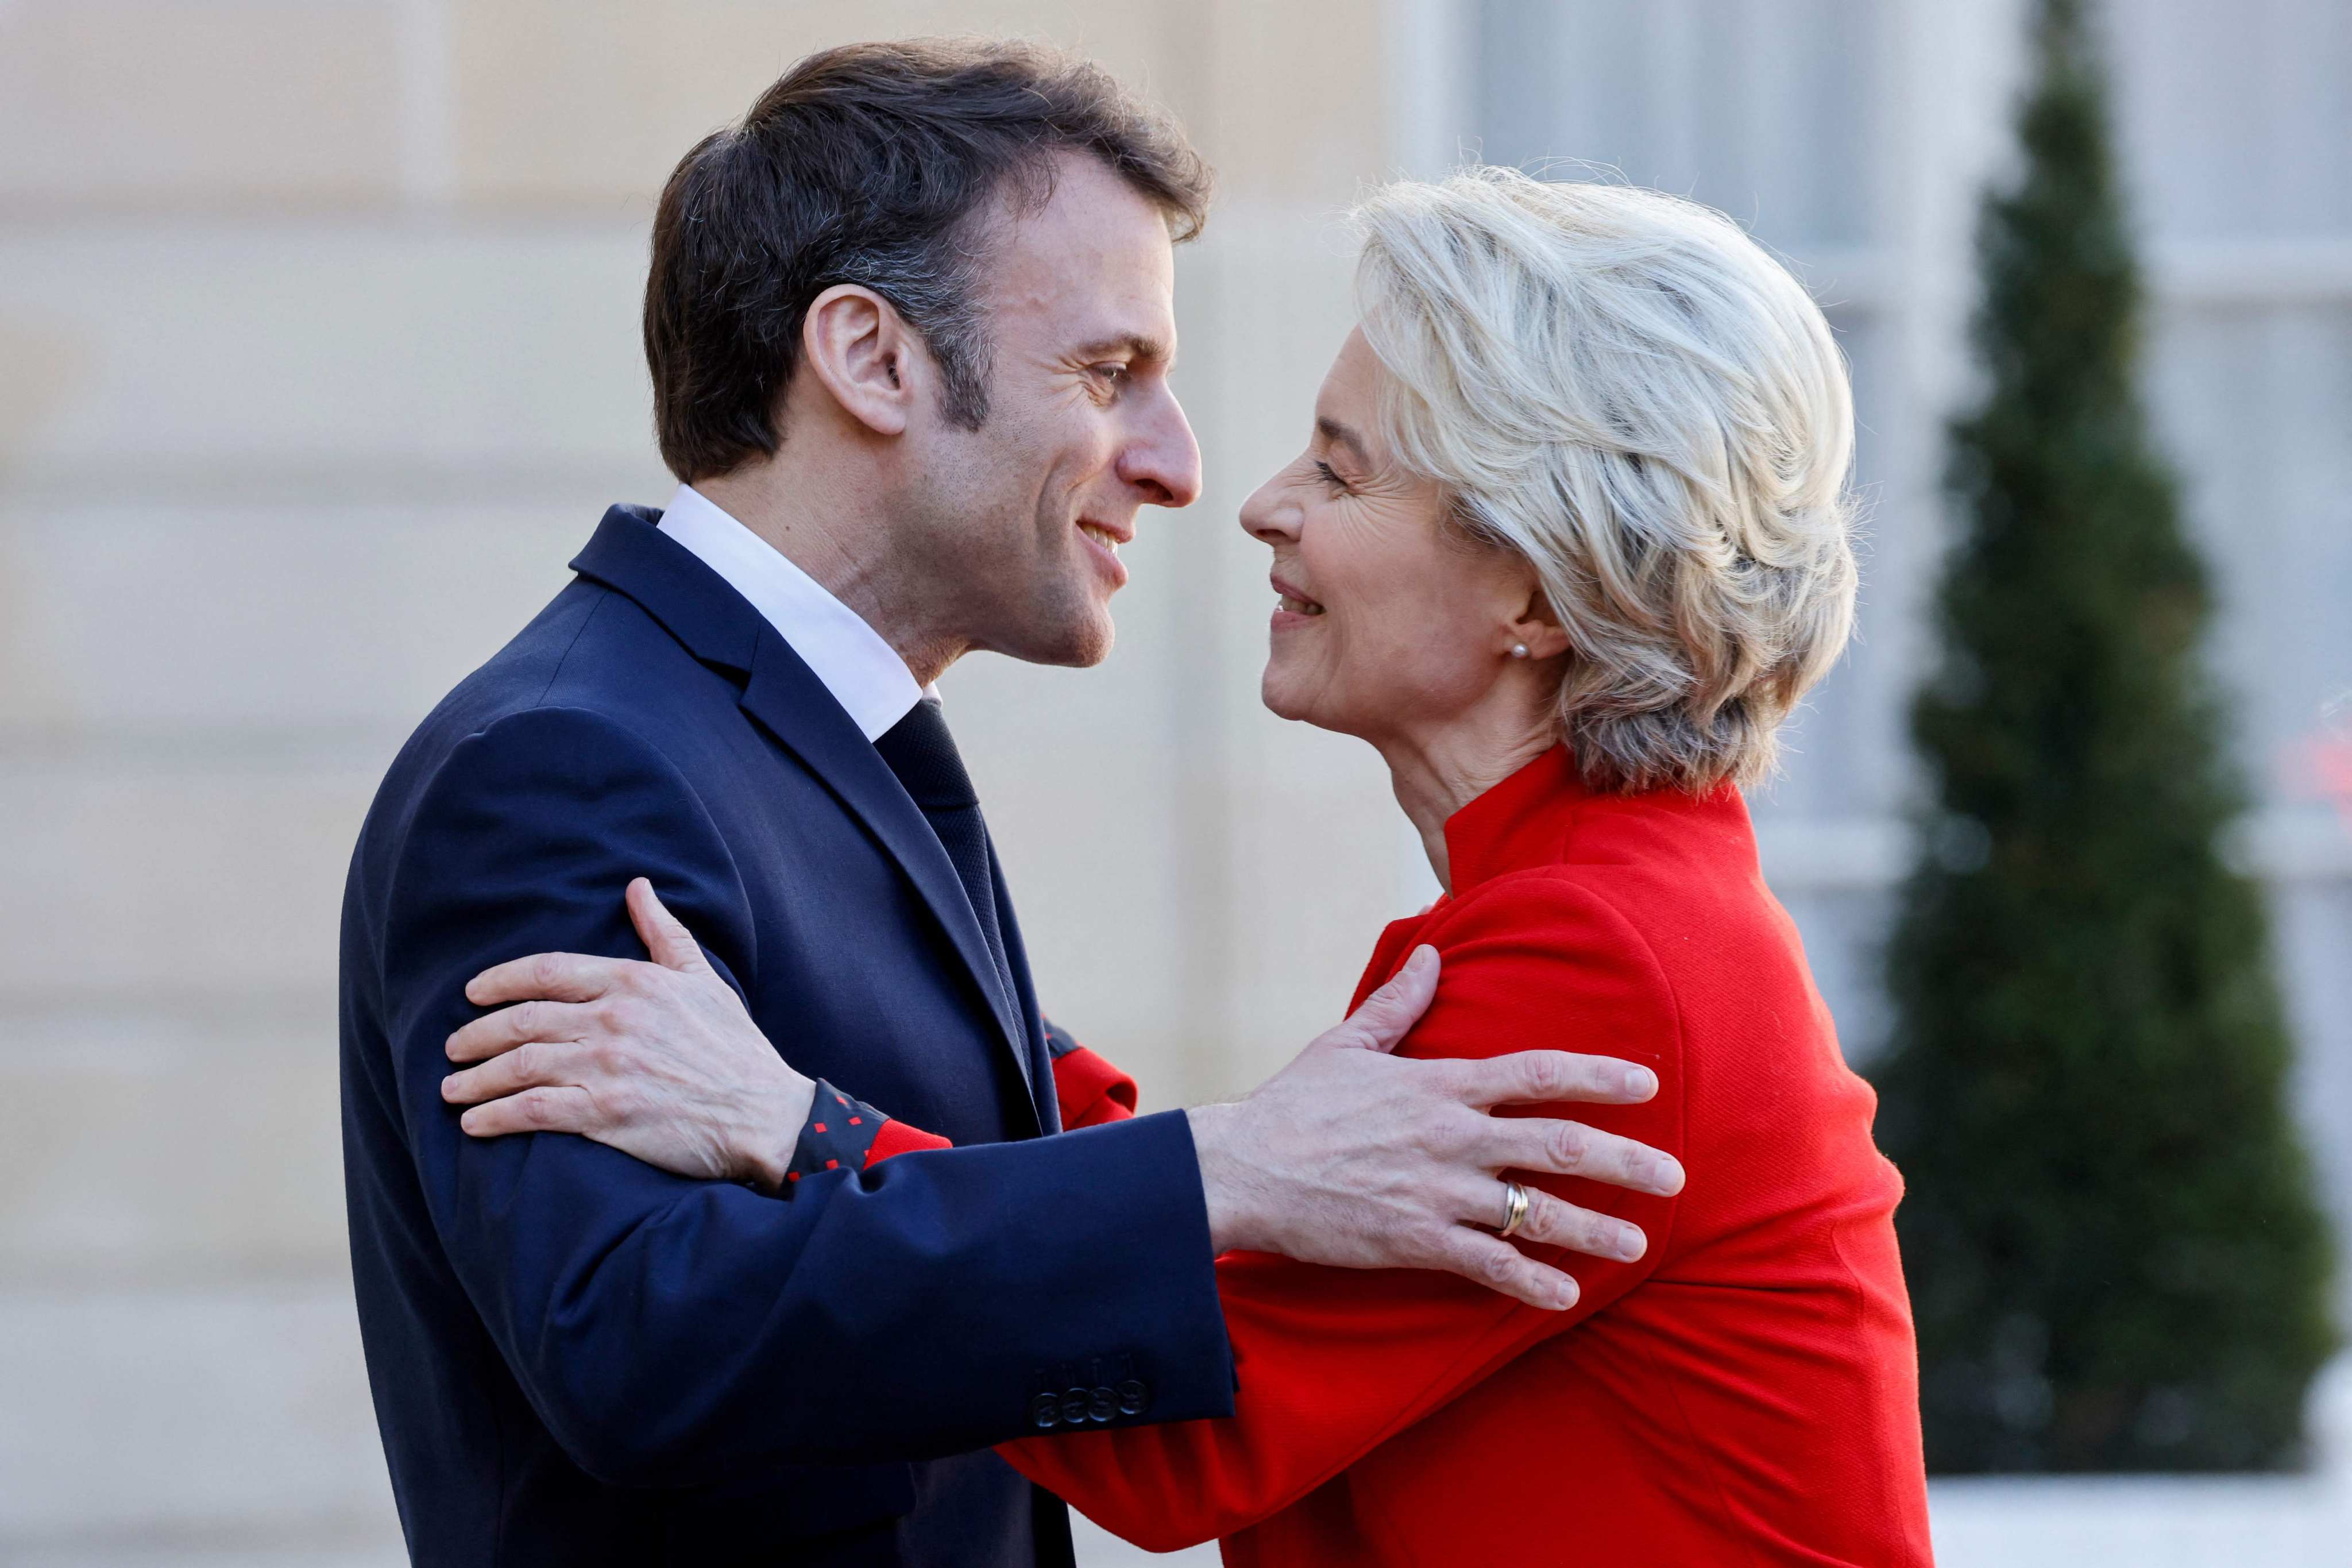 French President Emmanuel Macron welcoming European Commission President Ursula von der Leyen in Paris on Monday. But the two leaders may disagree sharply on how to deal with China during their trip to Beijing. Photo: AFP